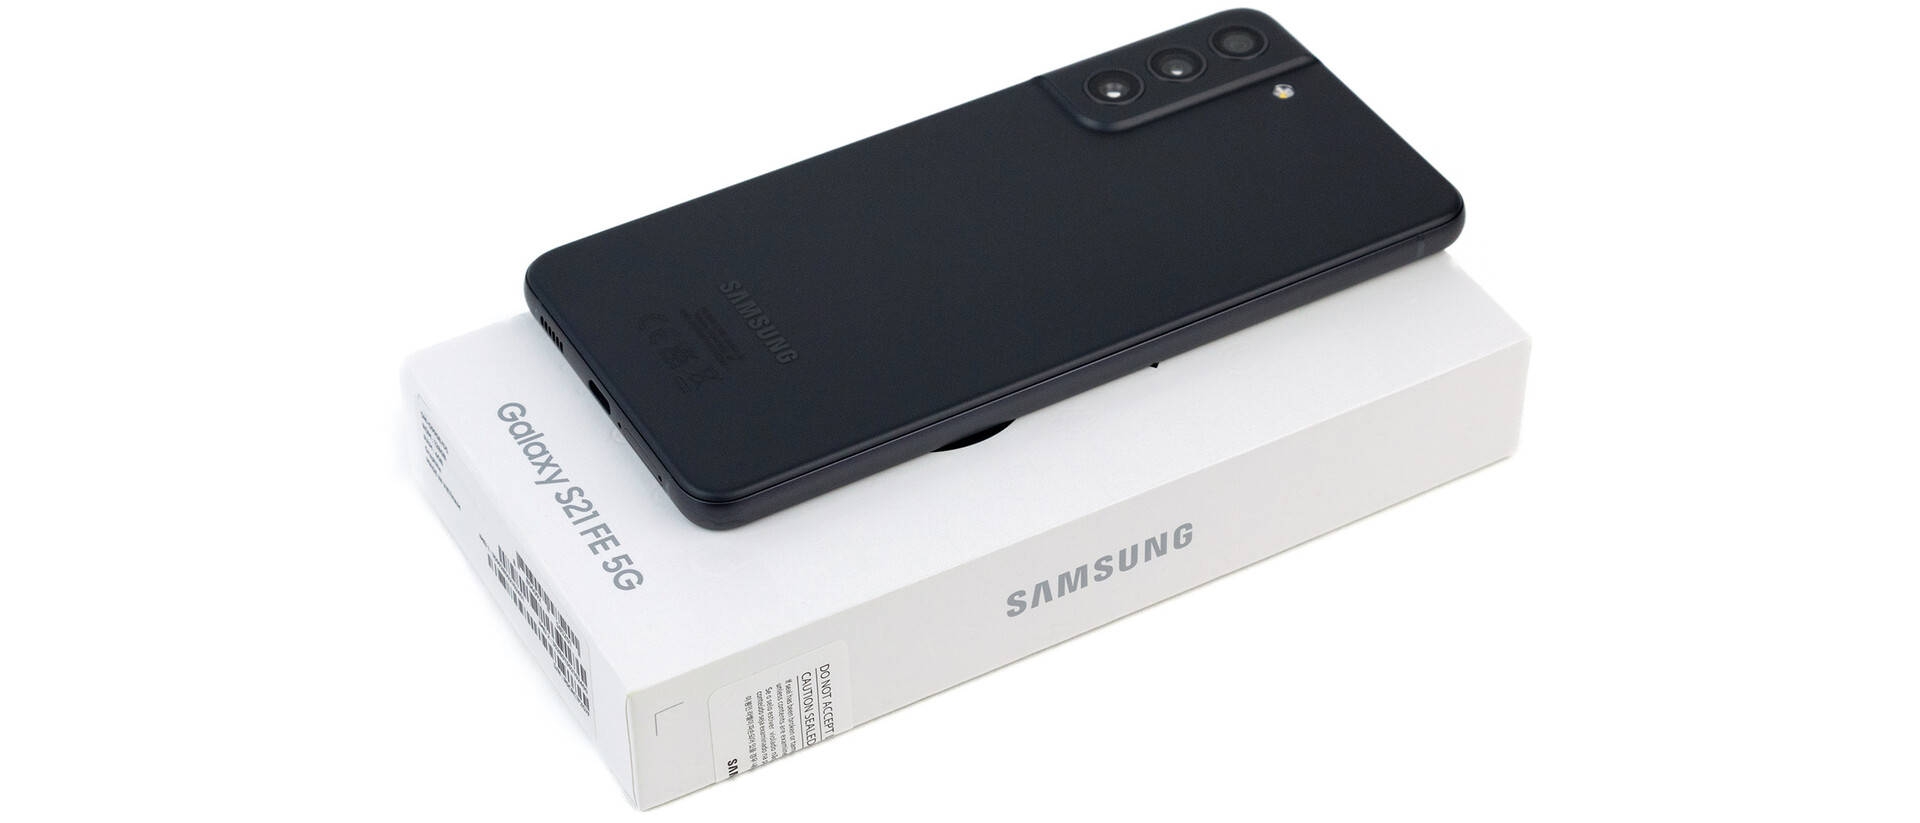 Samsung Galaxy S21 FE 5G Review